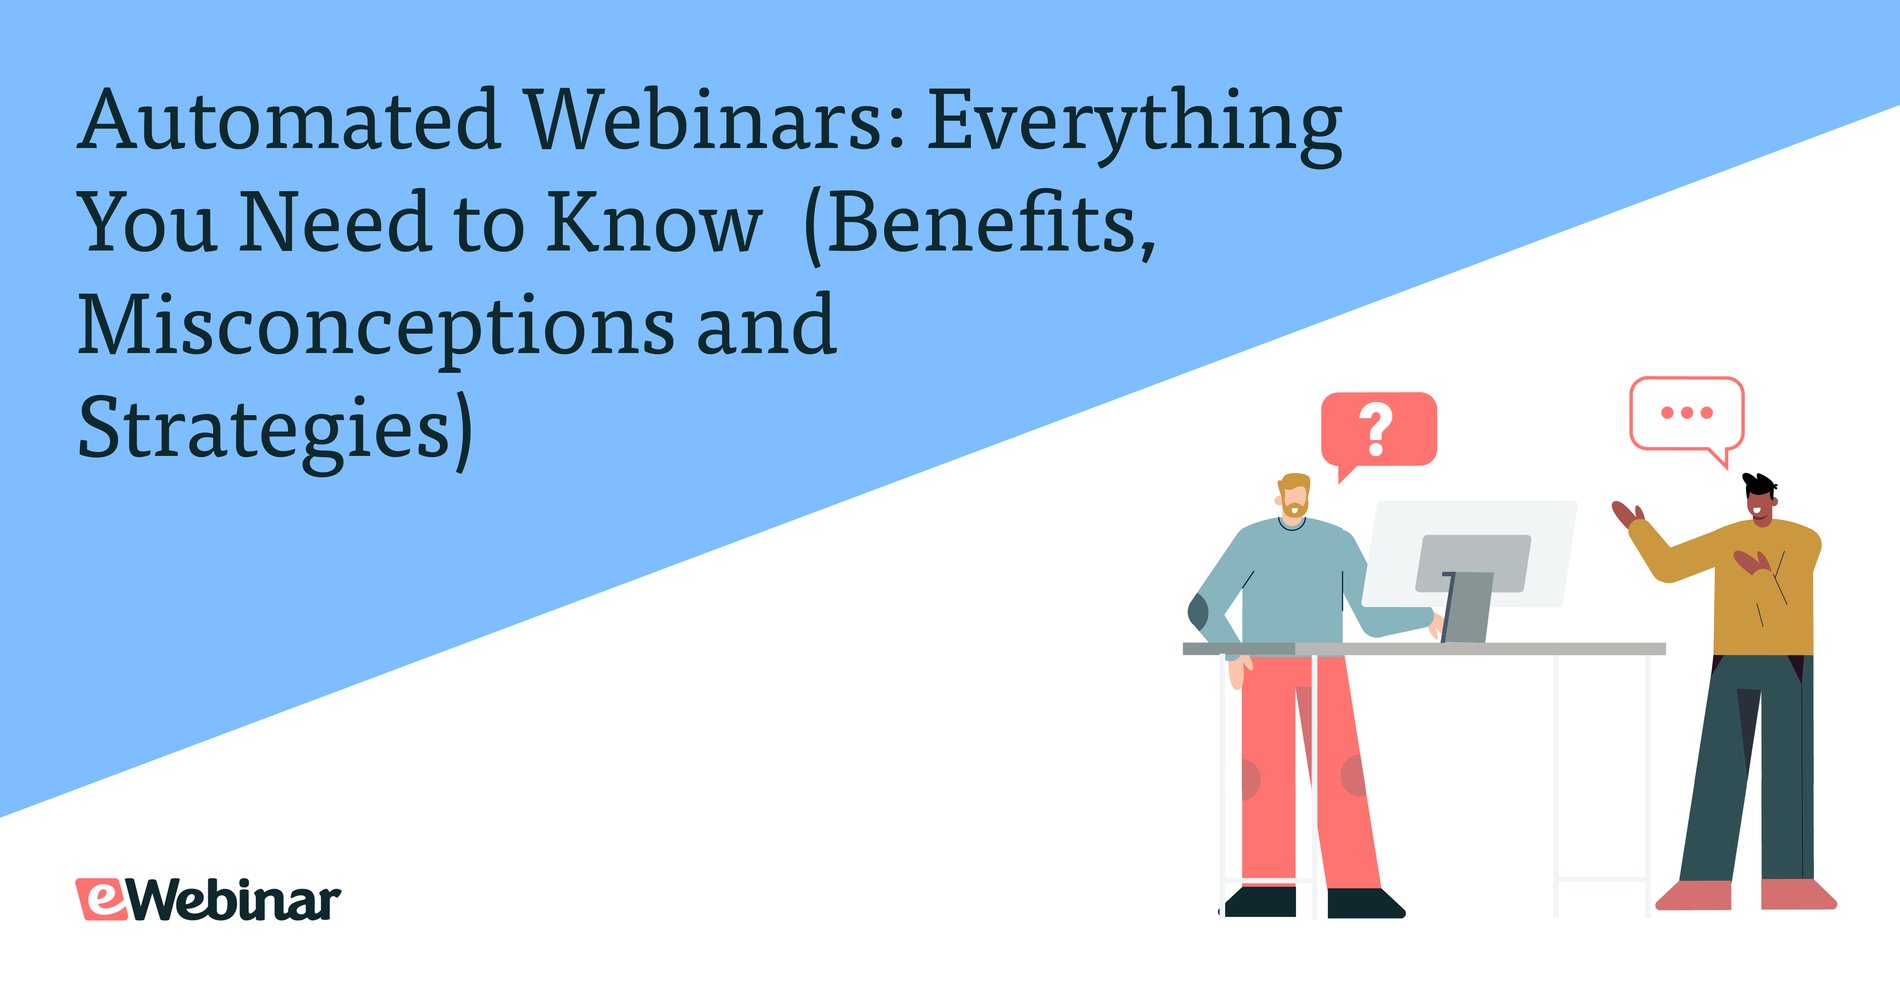 Automated Webinars: Everything You Need to Know (Benefits, Misconceptions, Strategies, and More!)